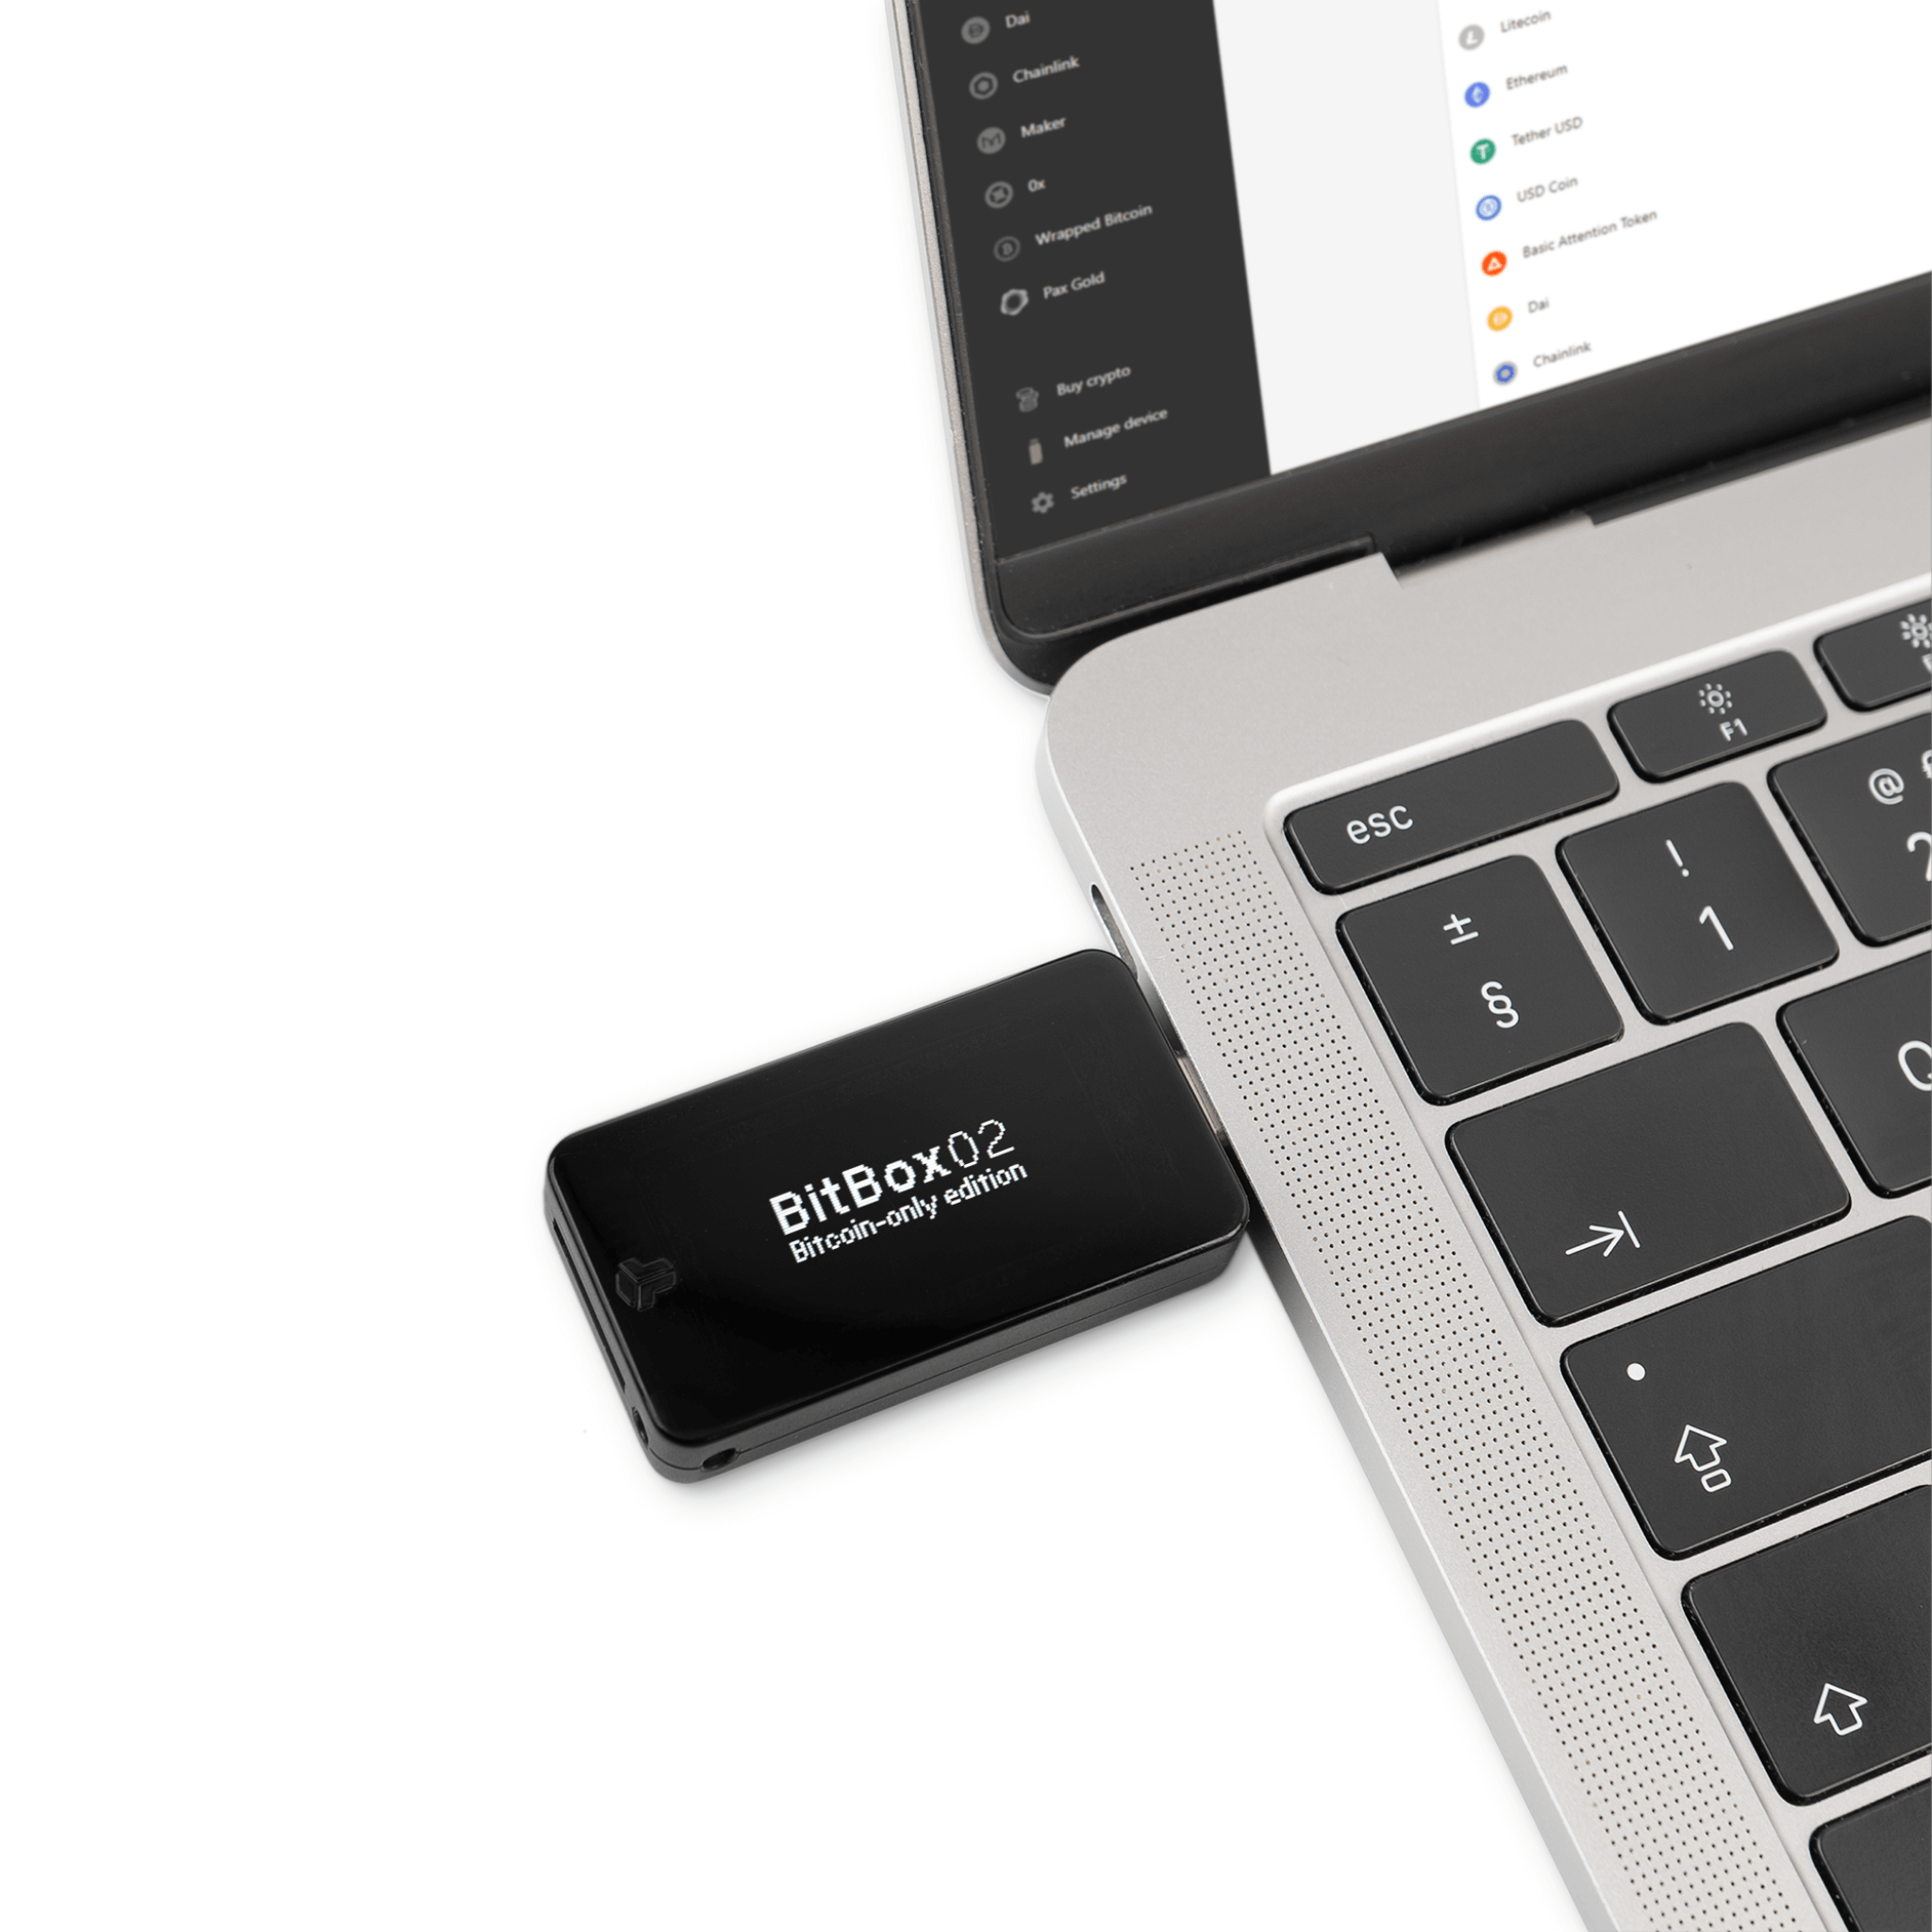 BitBox02 Bitcoin-Only Edition Cryptocurrency Hardware Wallet Plugged Into Apple Laptop